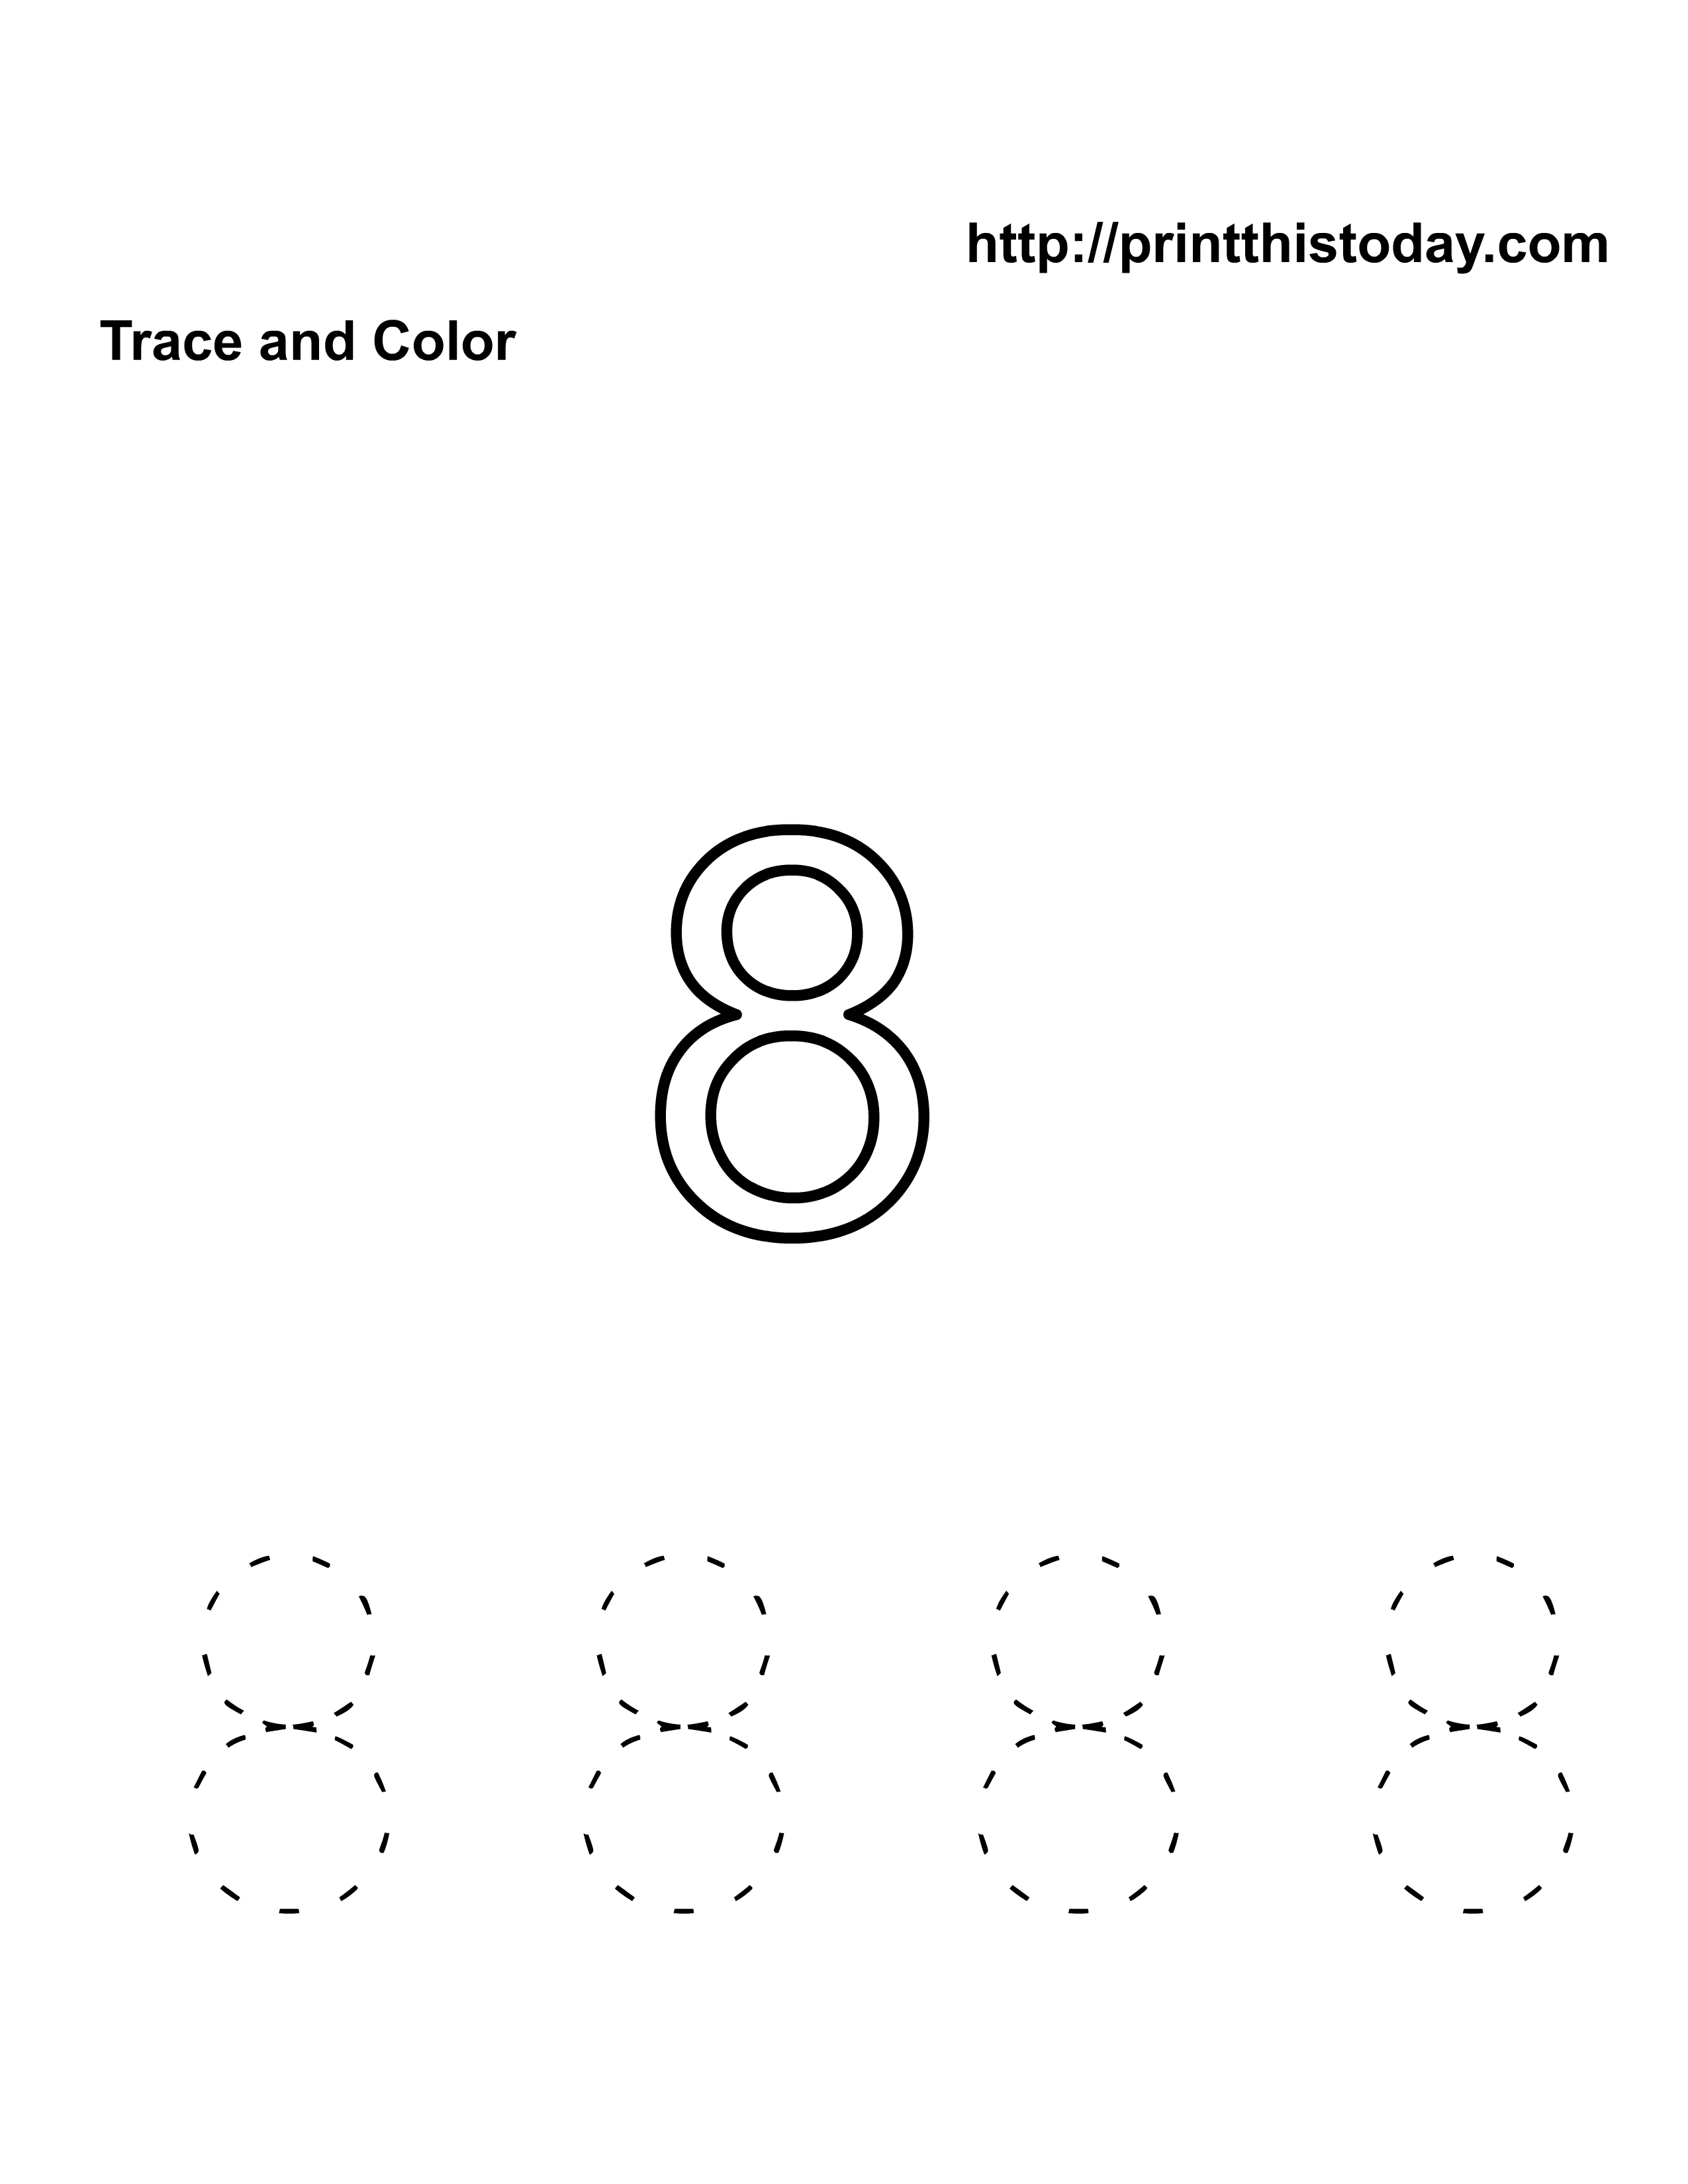 21-best-alphabets-and-numbers-worksheets-images-on-pinterest-alpha